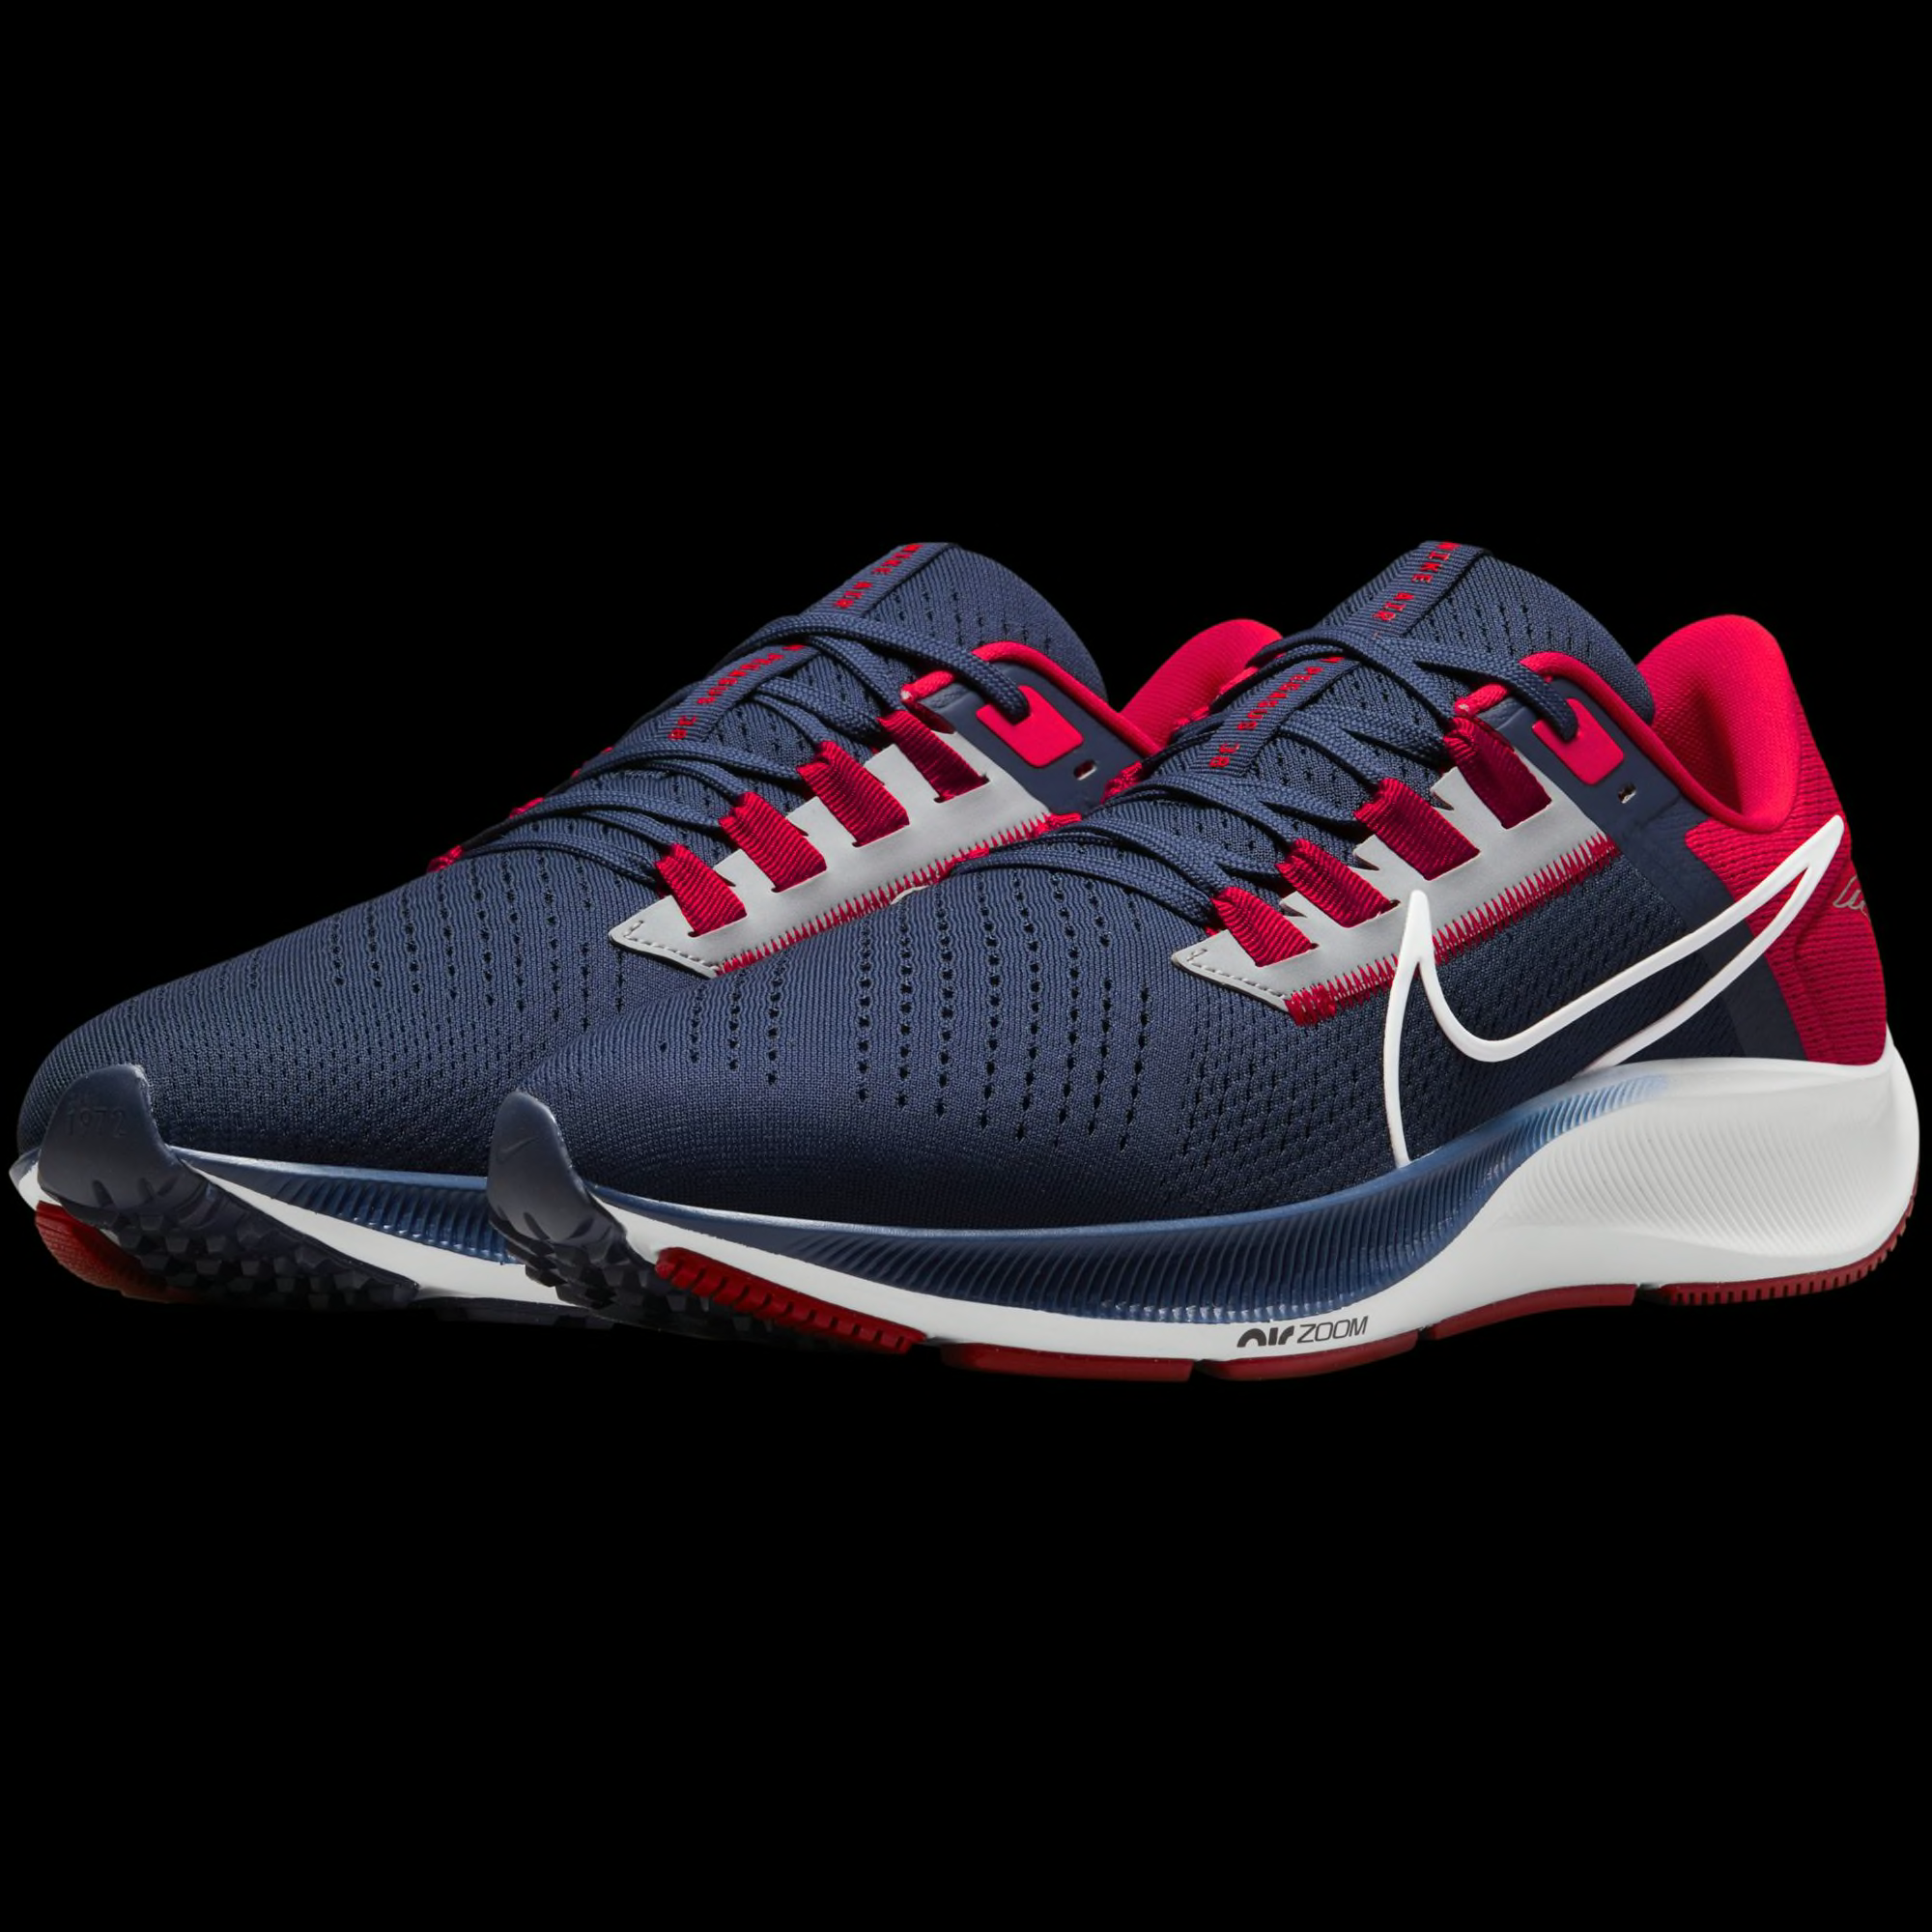 Order your New England Patriots Zoom shoes today